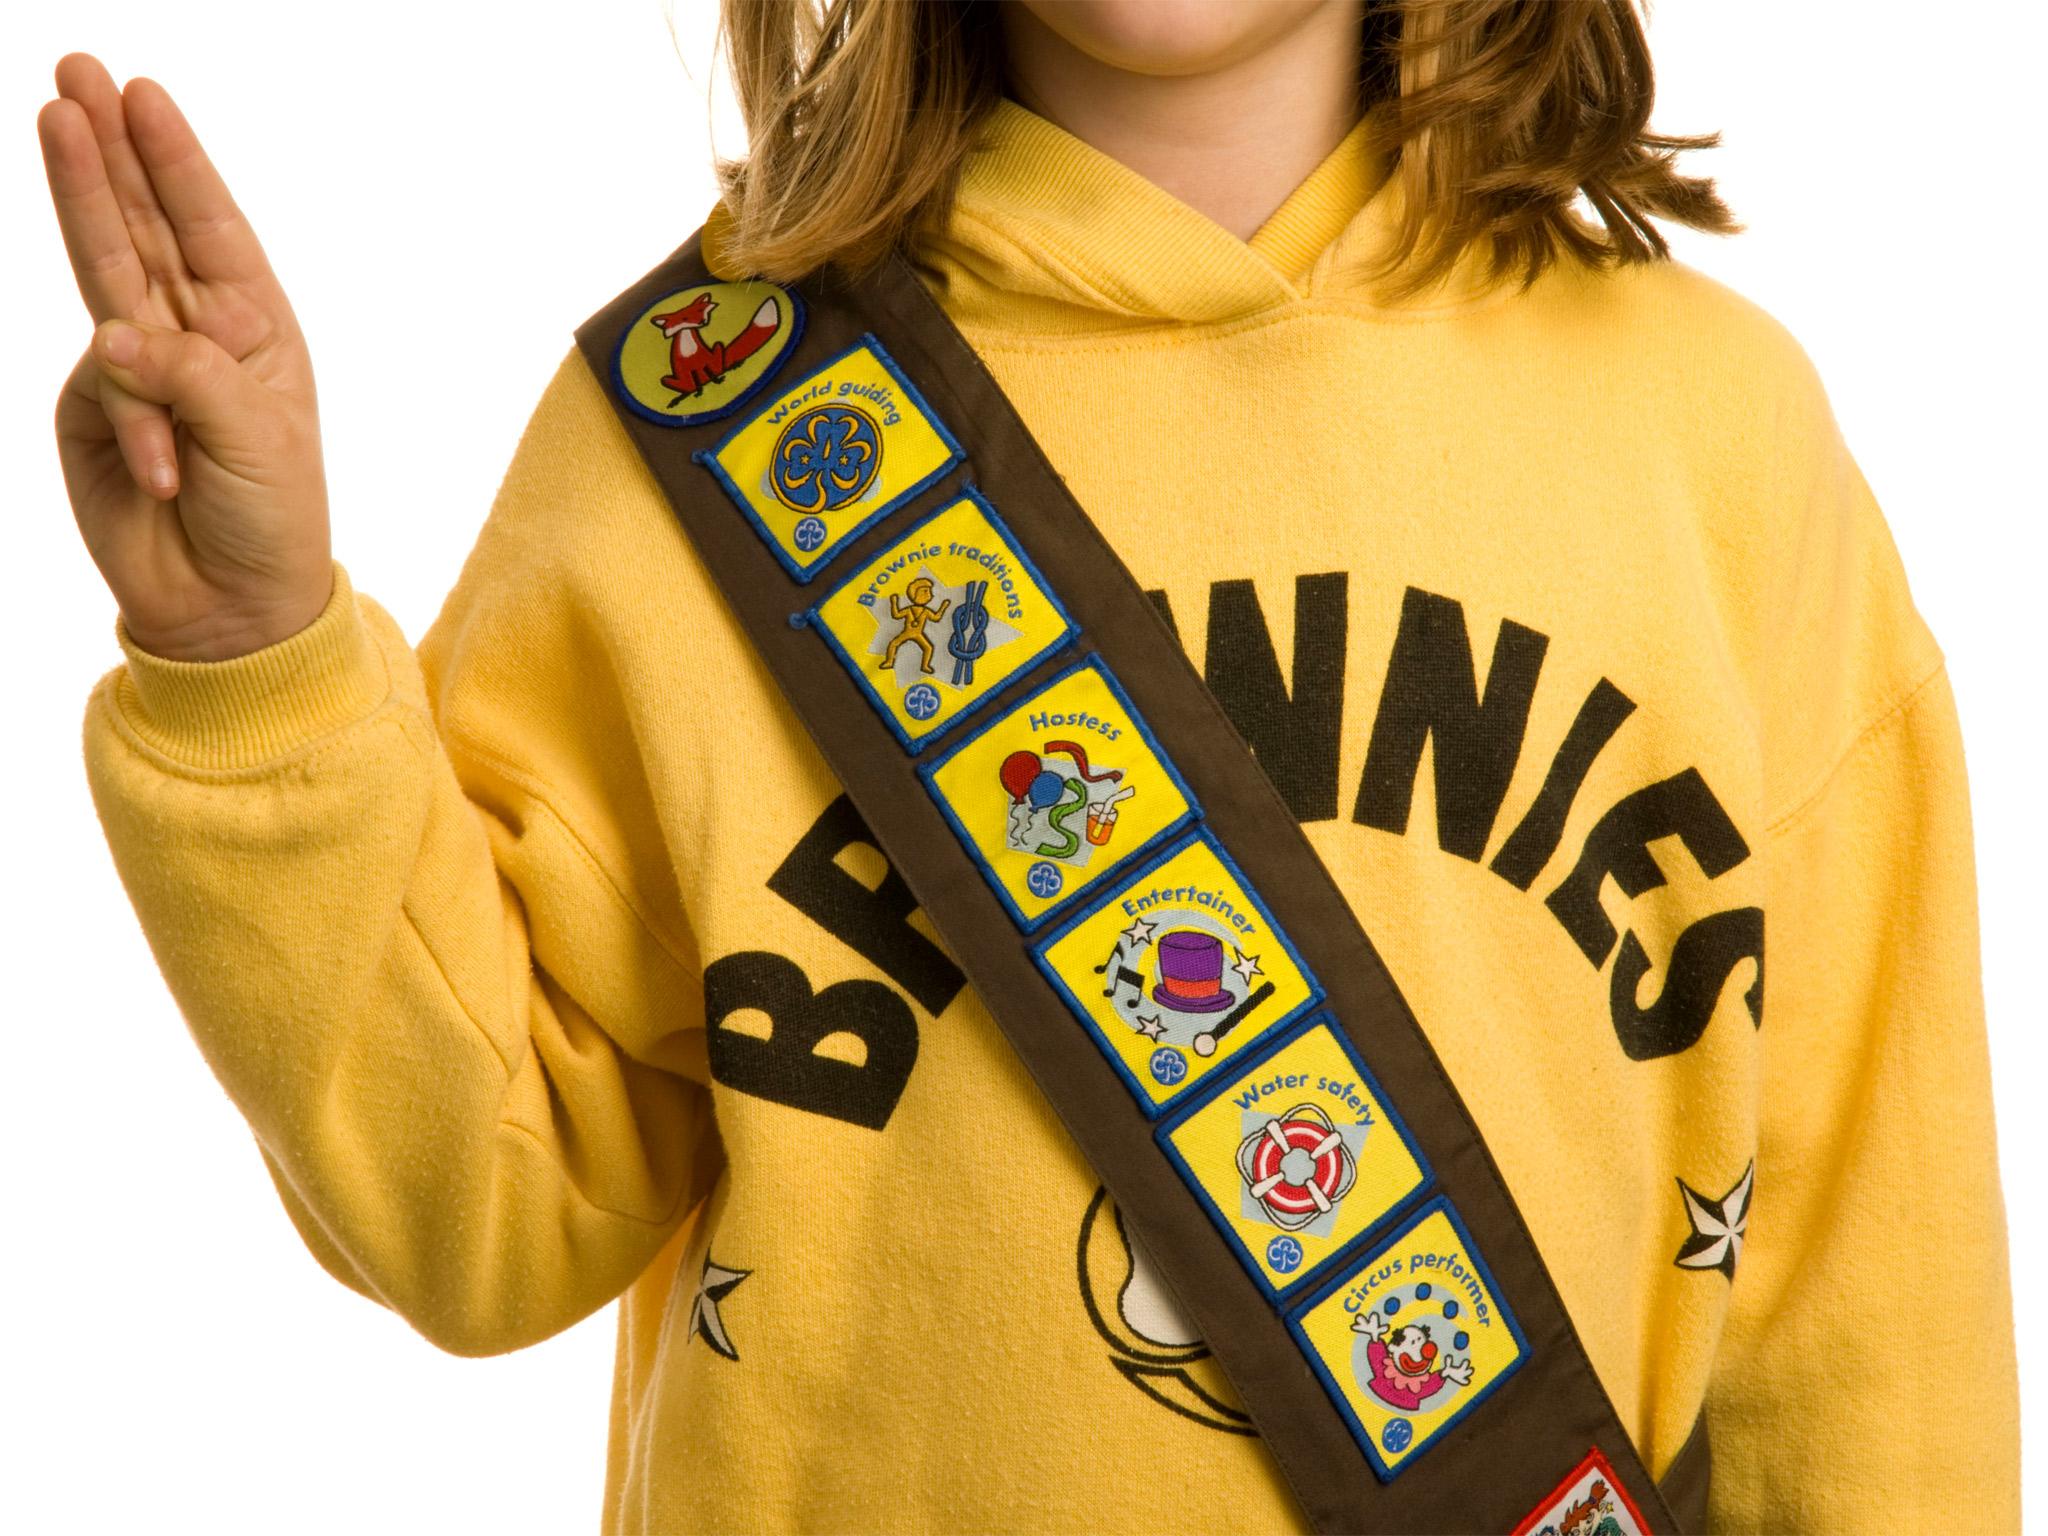 Guides cannot secure the highest badges without making the Promise